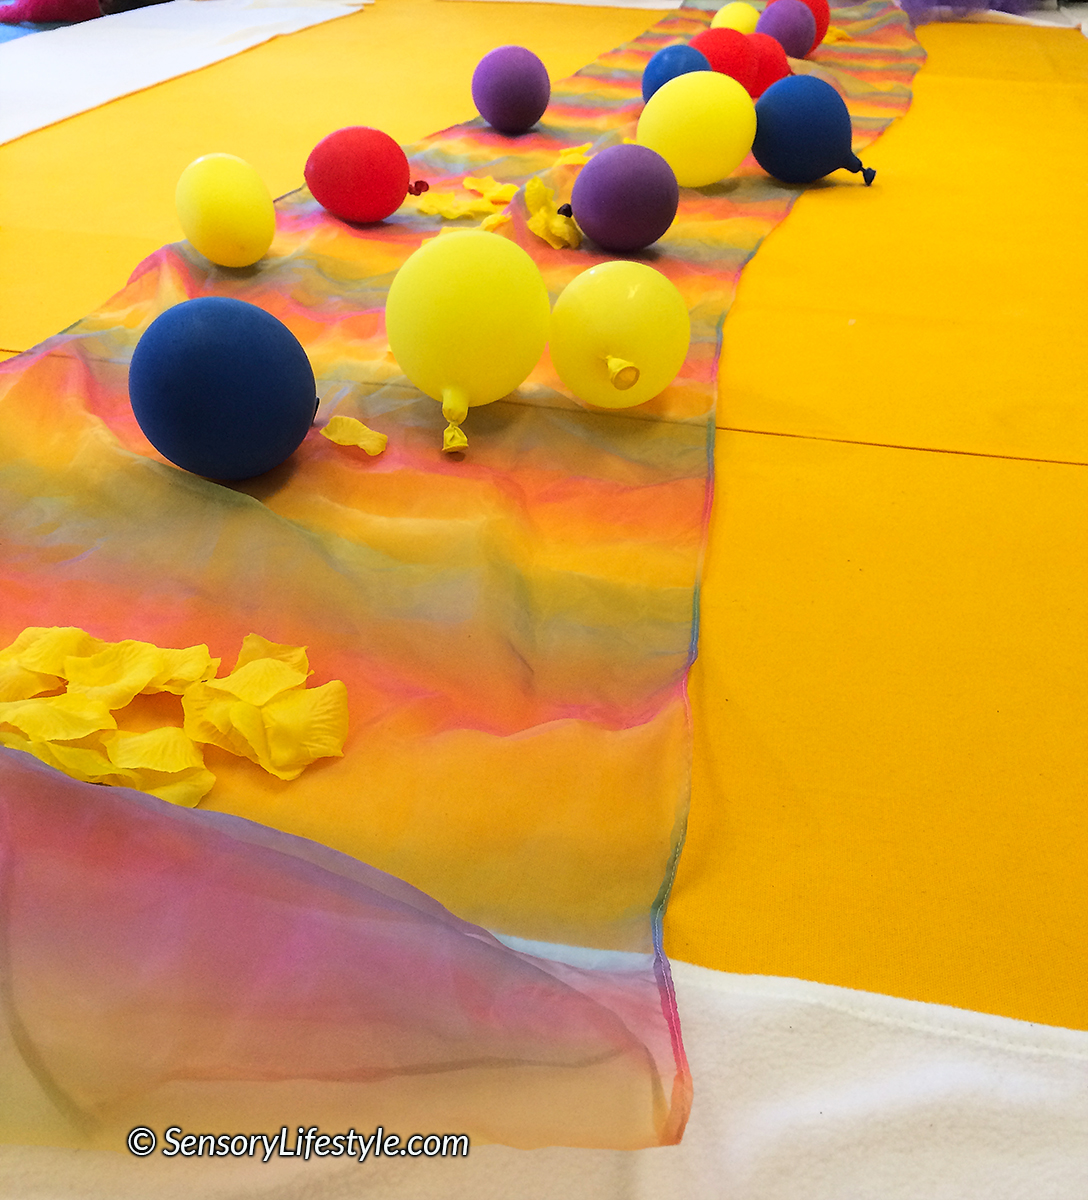 Indoor activities for toddlers: Balloon play